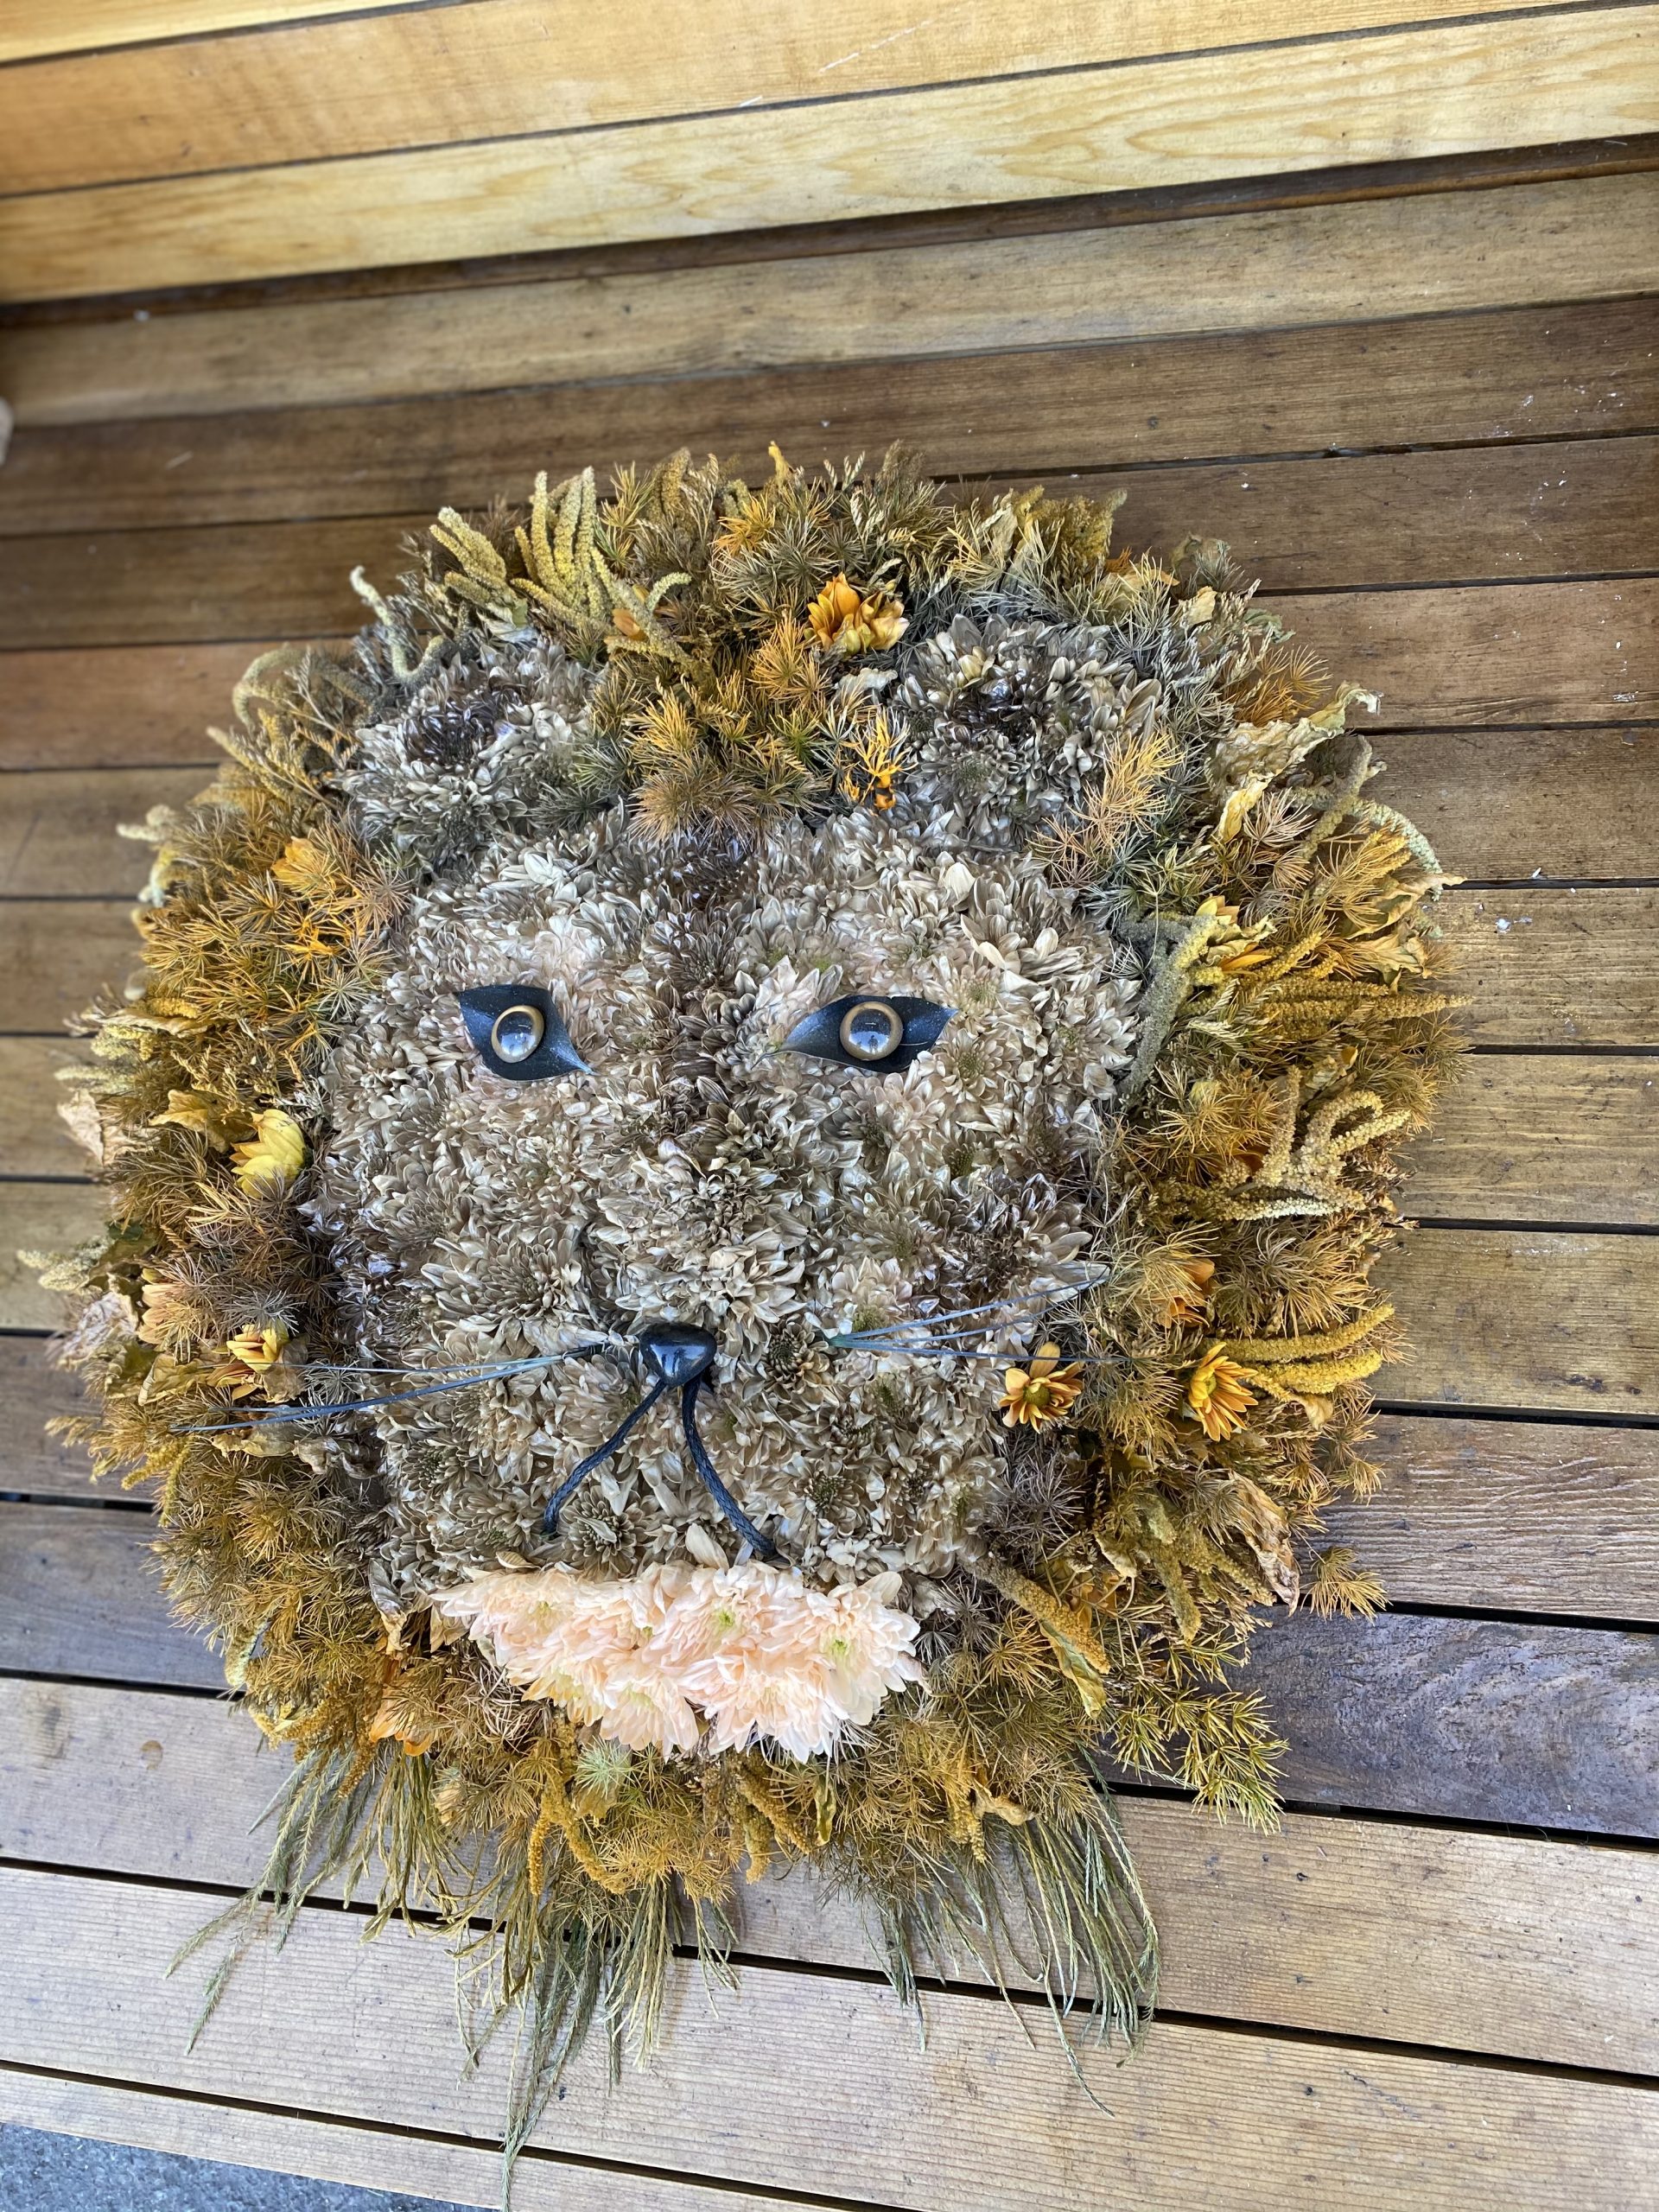 Lions head funeral tribute